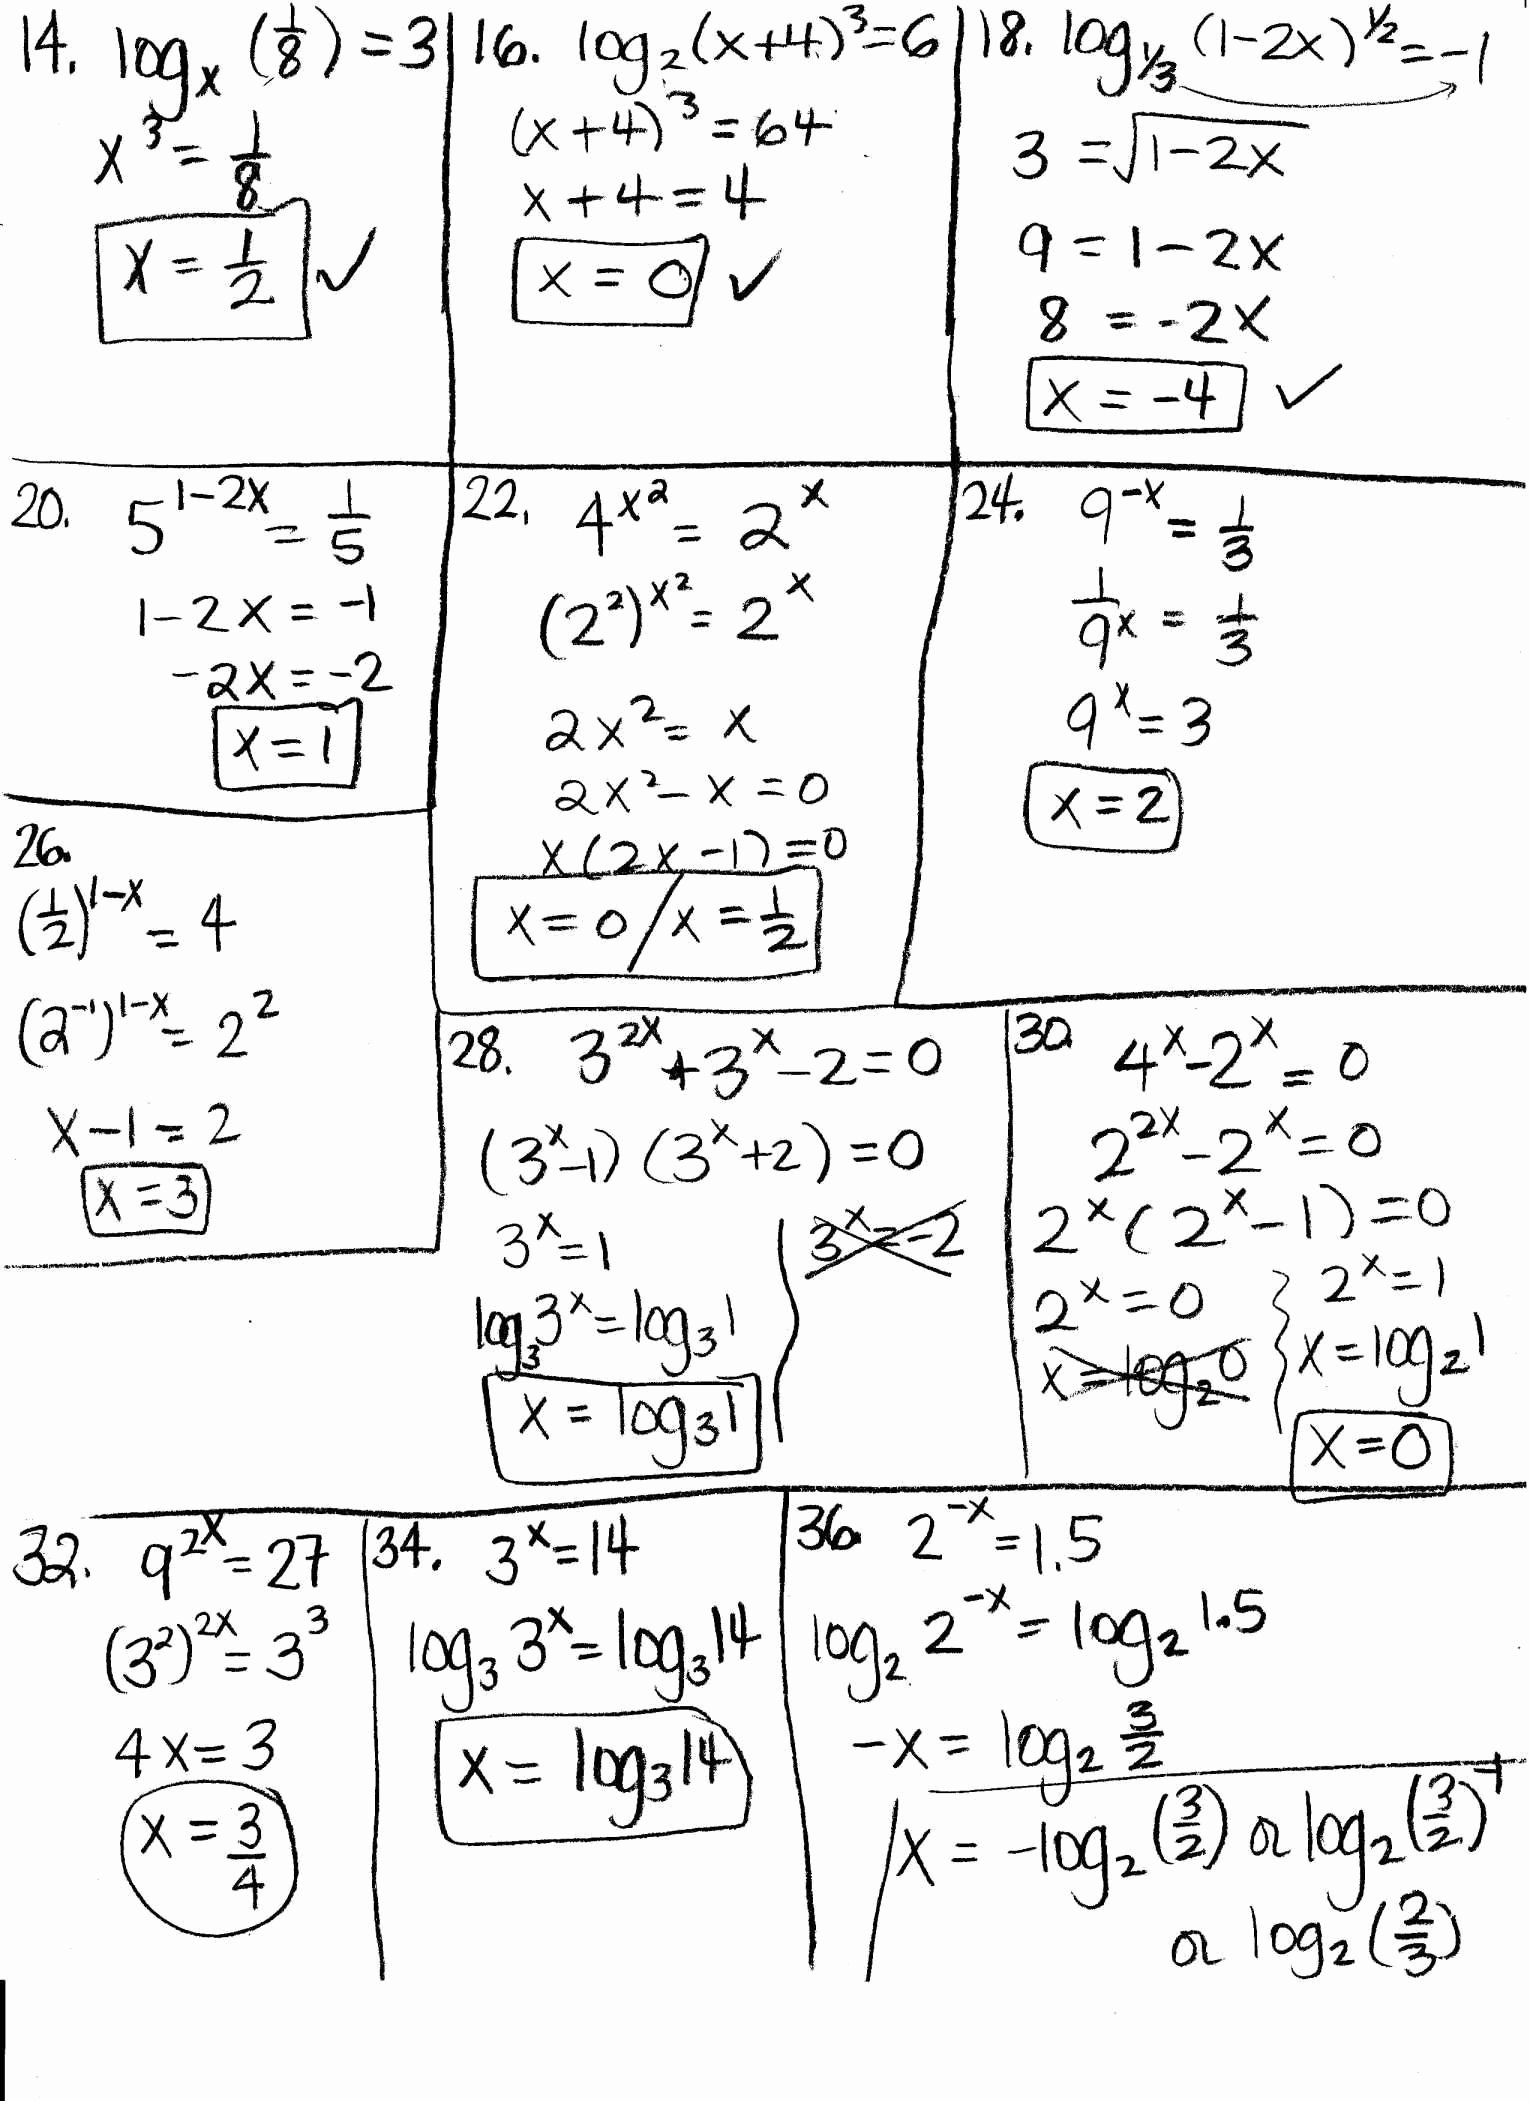 Logarithm Worksheet with Answers Unique Logarithmic Equations Worksheet with Answers